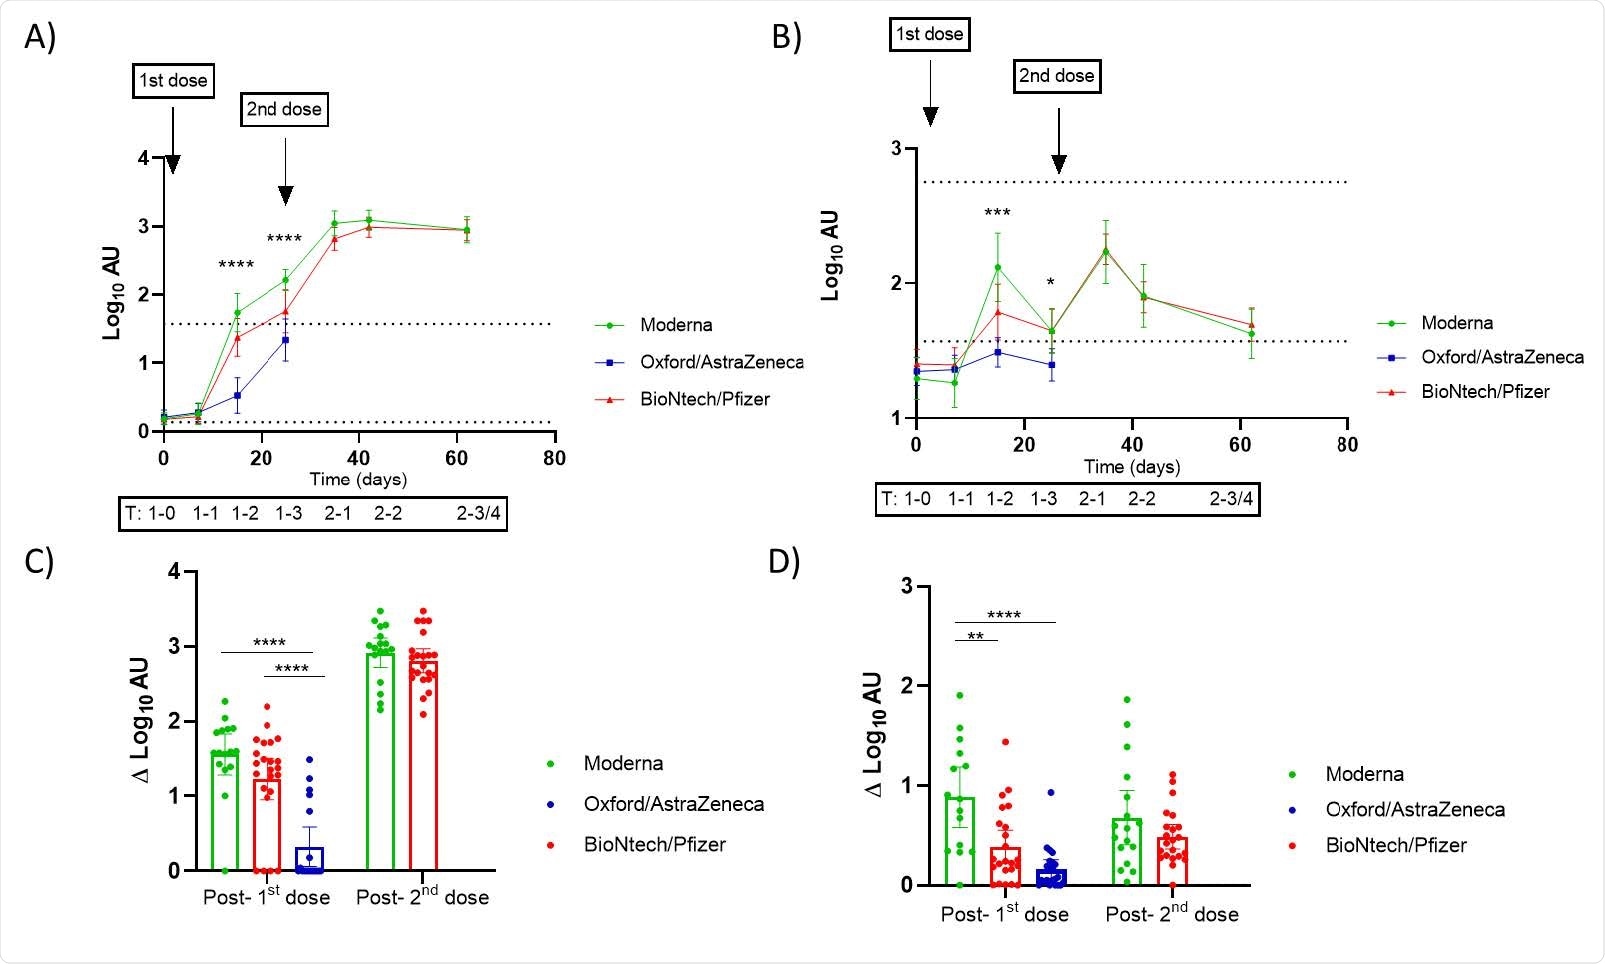 Effect of vaccination on IgG and IgA found in breast milk according to the administered vaccines in Spain. A, B) Trajectories of the anti-SARS-CoV-2 IgG (A) and IgA (B) in breast milk samples according to vaccine from baseline (before the 1 st dose) to 3-4 weeks post vaccination course. For the adenovirus-vectored vaccine (Oxford/AstraZeneca) only the period up to 3 weeks following the 1 st dose was analyzed. The upper dotted line in the plots of trajectories represent the mean of the log transformed arbitrary units (AU) for mothers confirmed of SARS-CoV-2 infection. The lower dotted lines in the trajectories plot represent the established positive cut-off value (log of the mean+2SD of prepandemic anti-SARS-CoV-2 IgA and IgG AU). Mixed-effect analysis with multiple comparisons post-hoc test was performed to test the significance in the antibody’s presence in breast milk and the differences according to vaccines. Y- axis marked the approximated days of sampling and the code of the timing as following: pre-vaccination (1-T0: 0 days), 1 week (1-T1), 2 weeks (1-T2) and 3 weeks (1-T3) post the 1st dose of vaccine; and 1 week (2-T1), 2 weeks (2-T2) and 3-4 weeks (2-T3/4) post 2nd dose. Comparison of the increment in log-transformed AU from the determination of SARS-CoV-2 IgG (C) and IgA (D) from baseline to 2 weeks post 1st dose and 2nd dose. One-way ANOVA with a Tukey’s post-hoc test for multiple comparisons was performed to assess the statistical significance of the differences in the antibody detection. Data is presented as mean and 95% of CI of the log-transformed arbitrary units (AU). * p<0.05, ** p<0.01, *** p<0.001, **** p<0.0001.